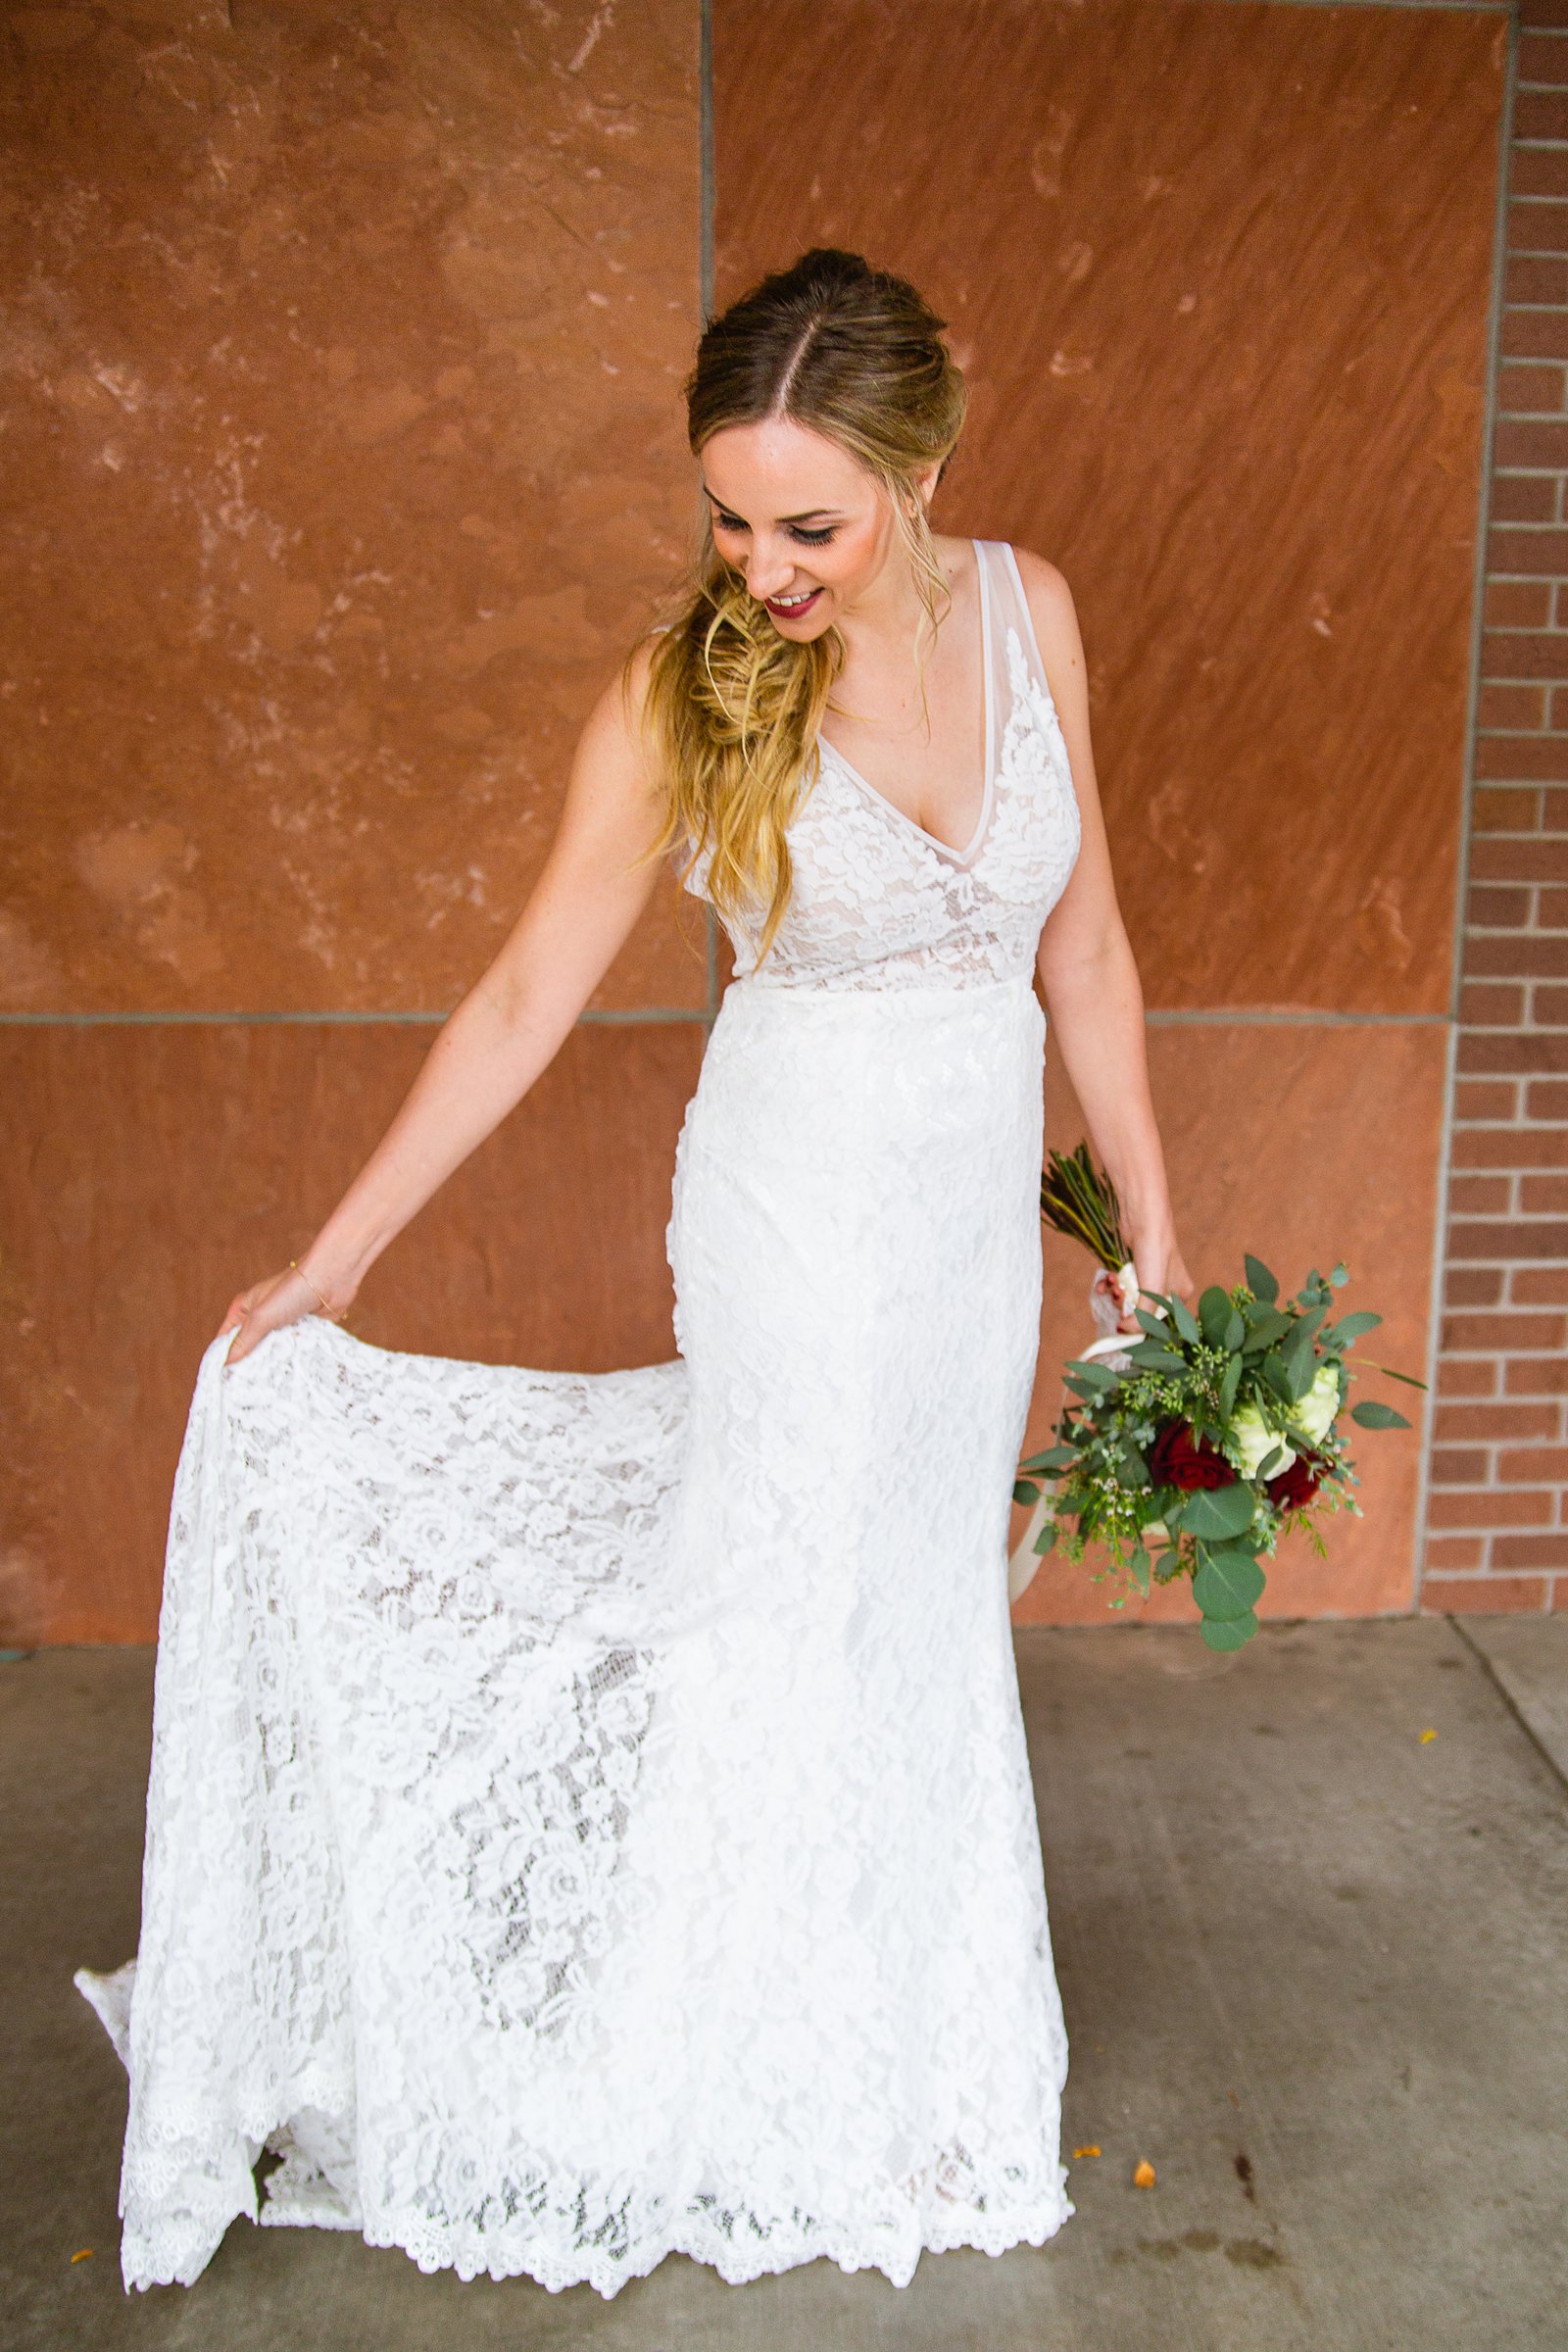 Bride's simple lace mermaide wedding dress for her Flagstaff Courthouse wedding by PMA Photography.